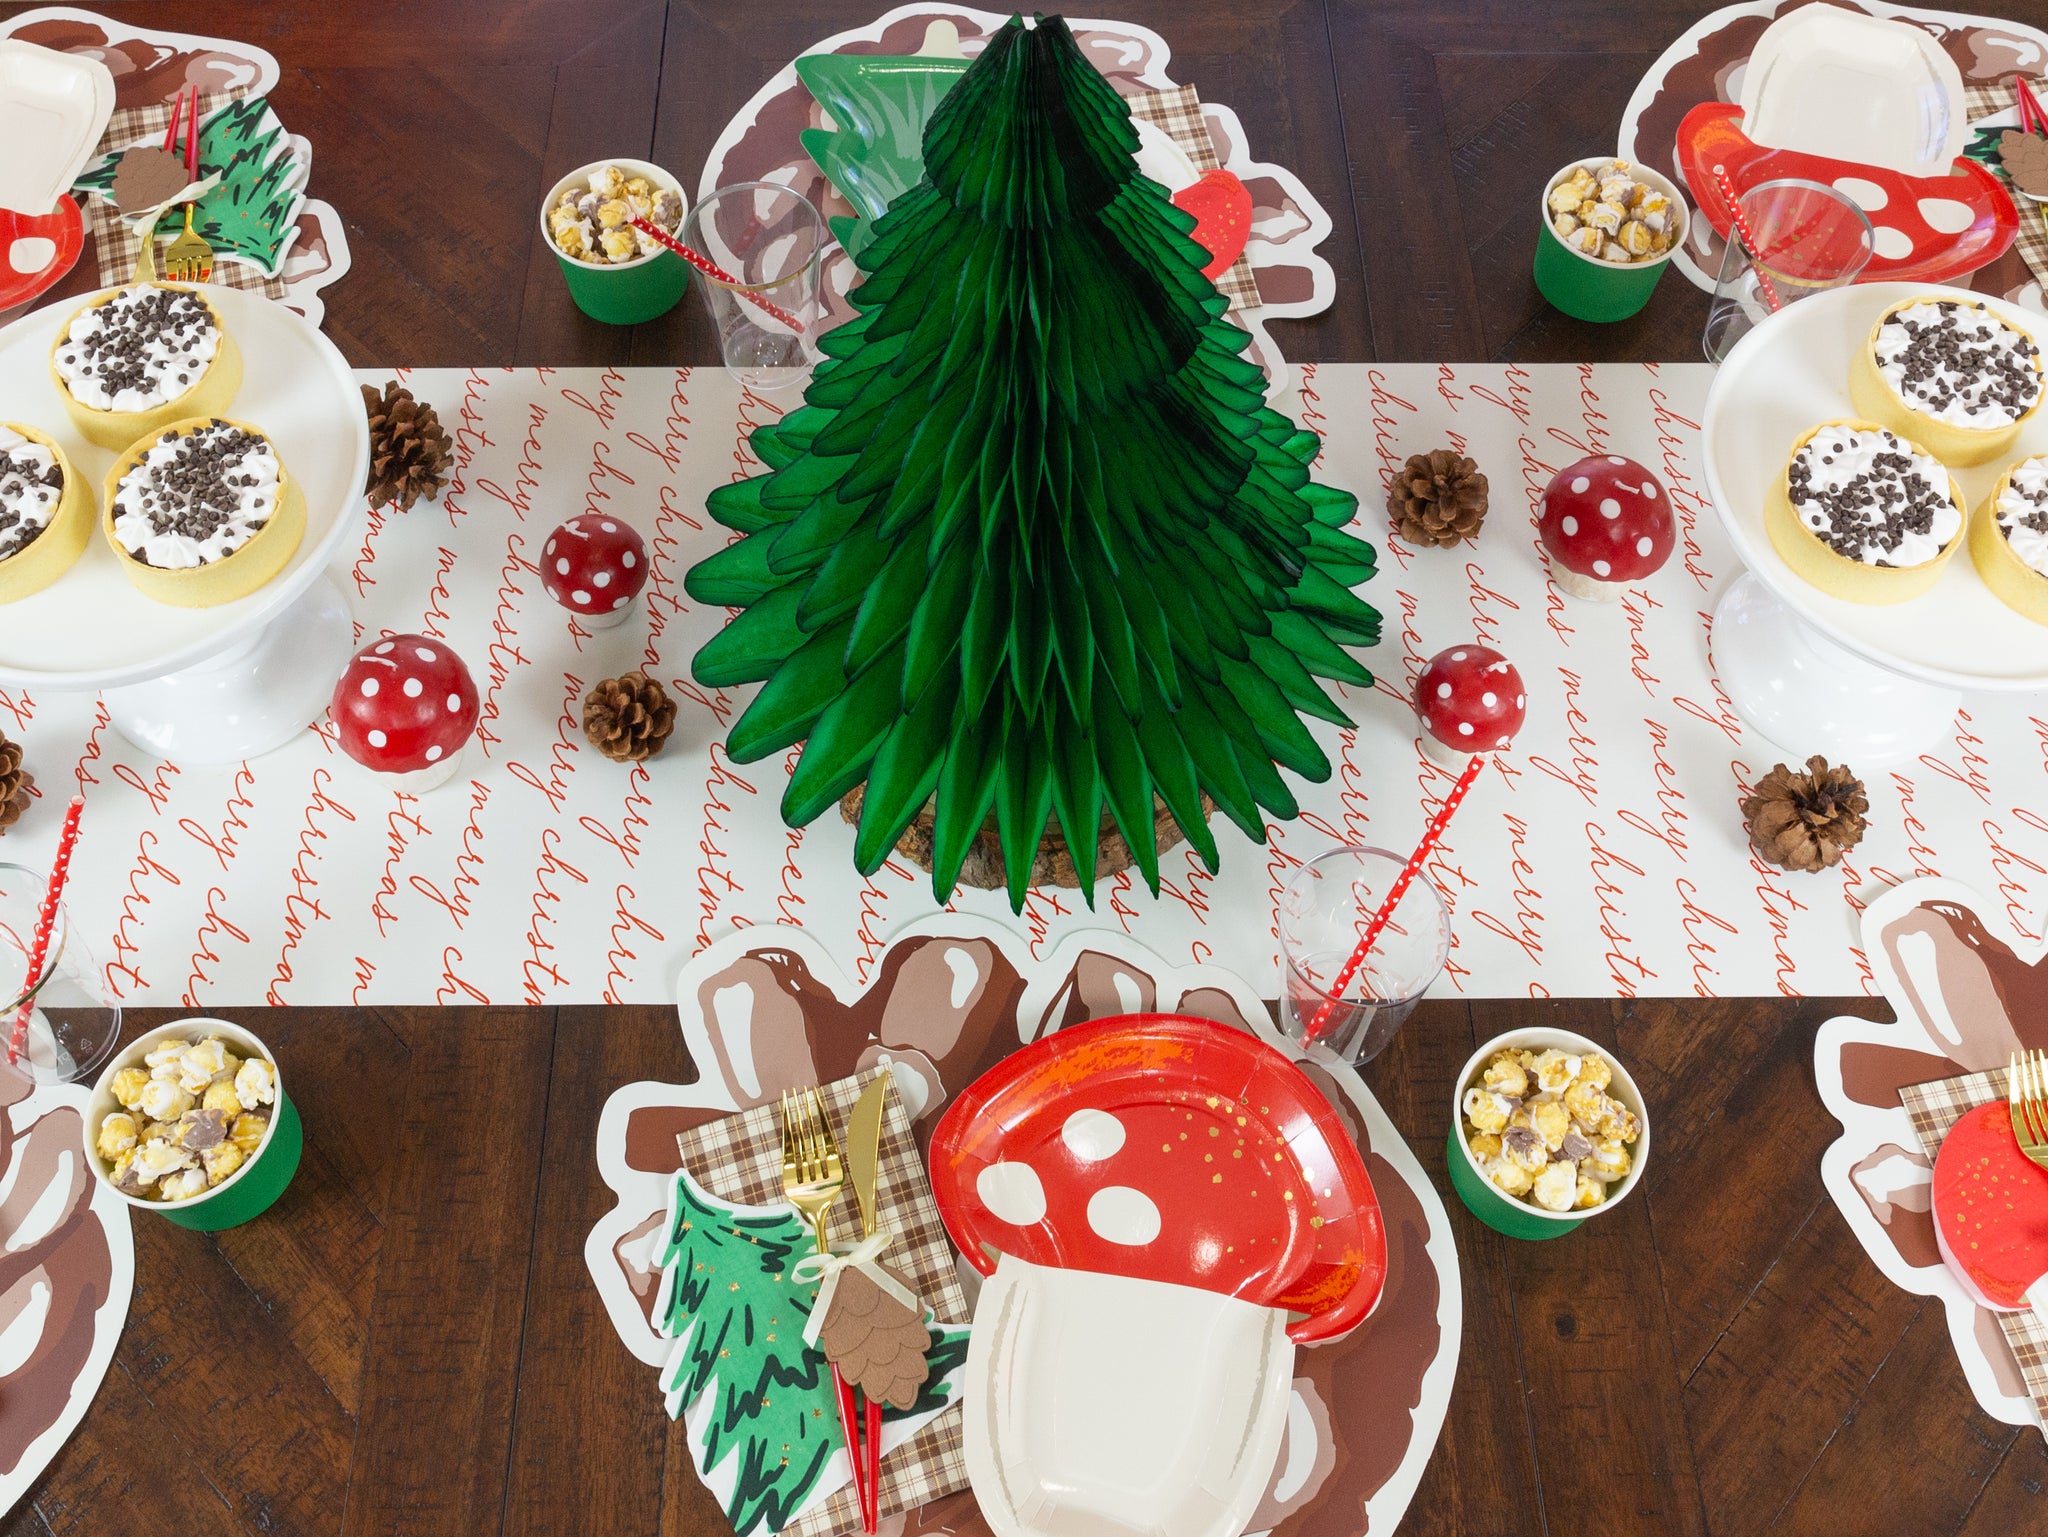 Woodland Christmas Table Decorations | The Party Darling